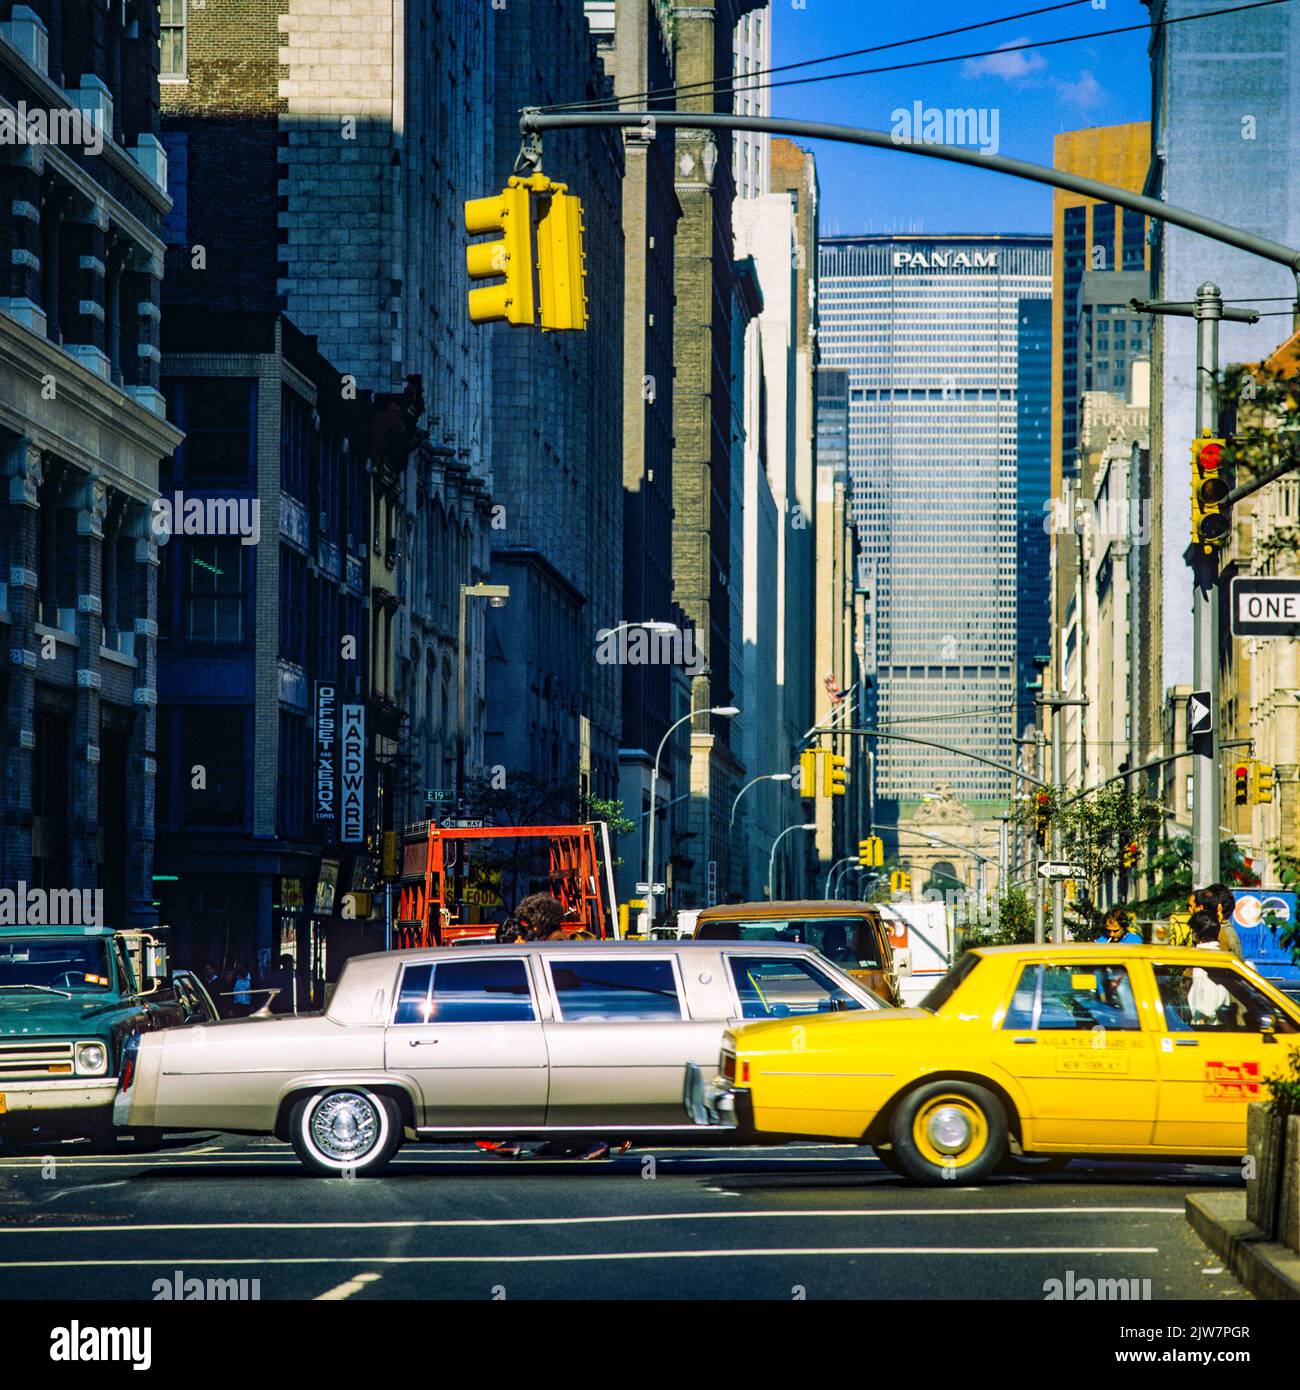 New York, 1980s, Park Avenue south, yellow taxi, limousine, vehicular traffic, Panam building in the distance, Manhattan, New York City, NYC, NY, USA, Stock Photo